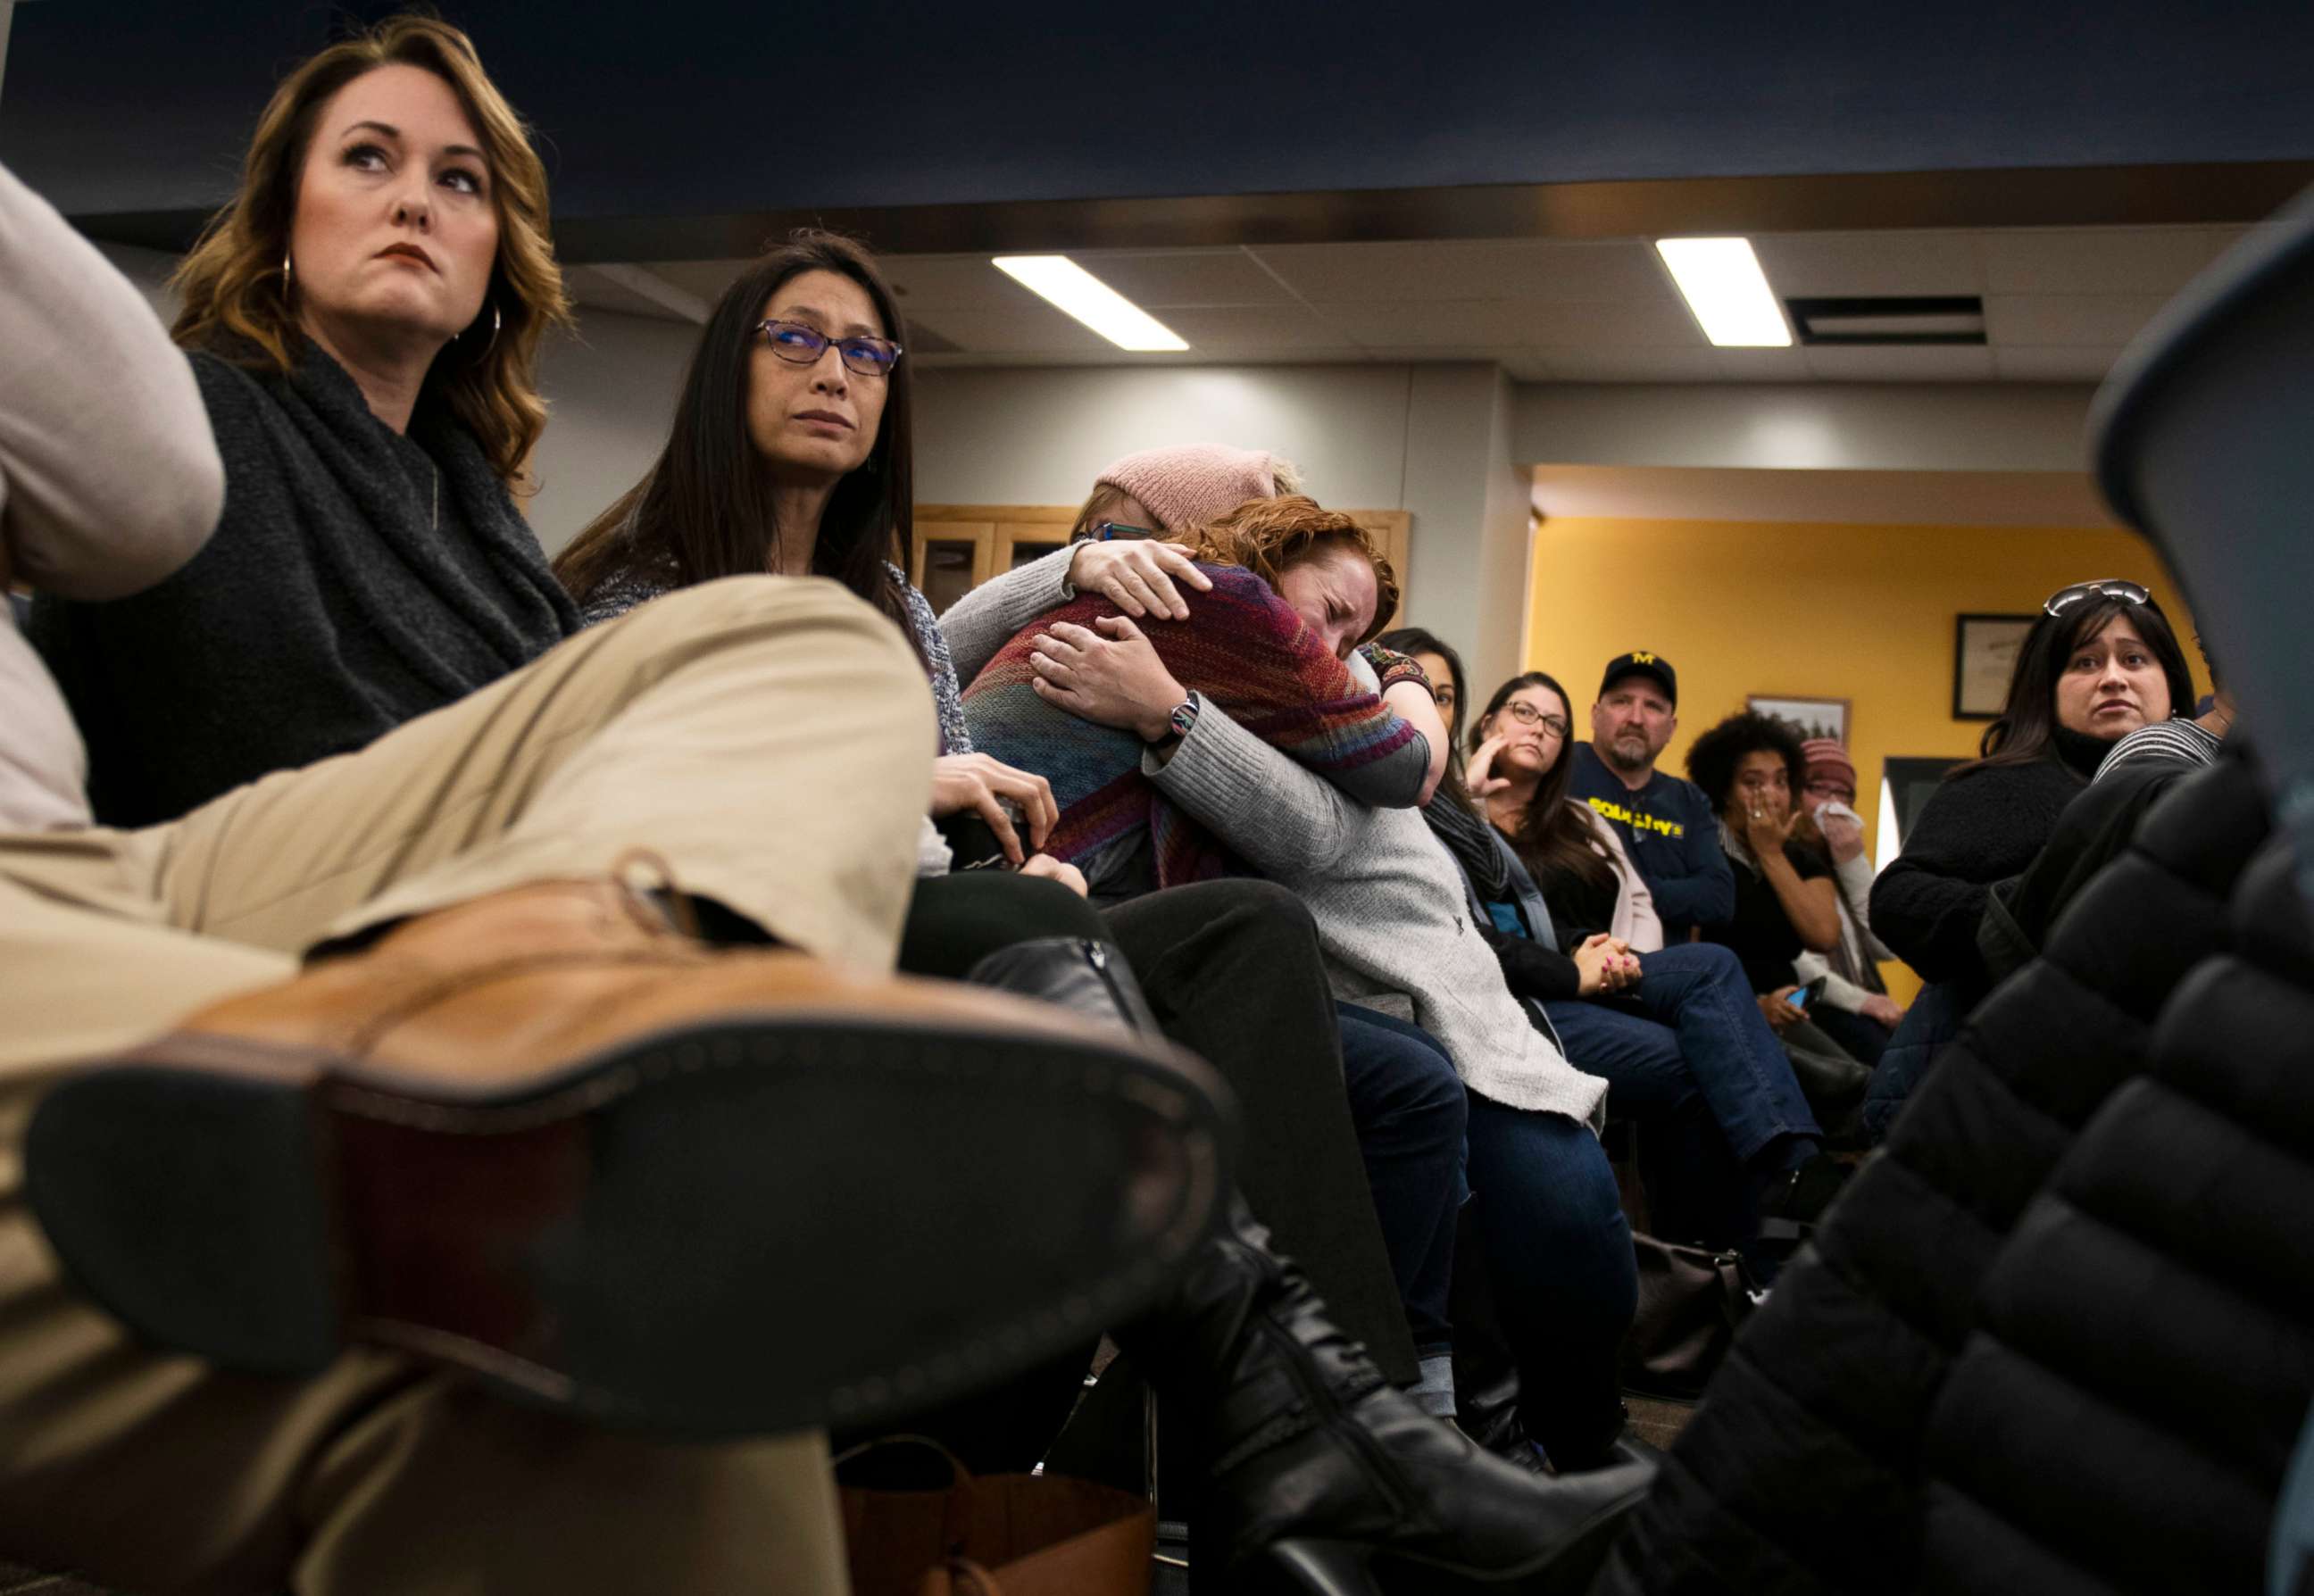 PHOTO: Lisa Householder is embraced after giving an emotional speech during a school diversity and inclusion meeting community meeting at Liberty School in Saline, Mich., Monday, Feb. 3, 2020.